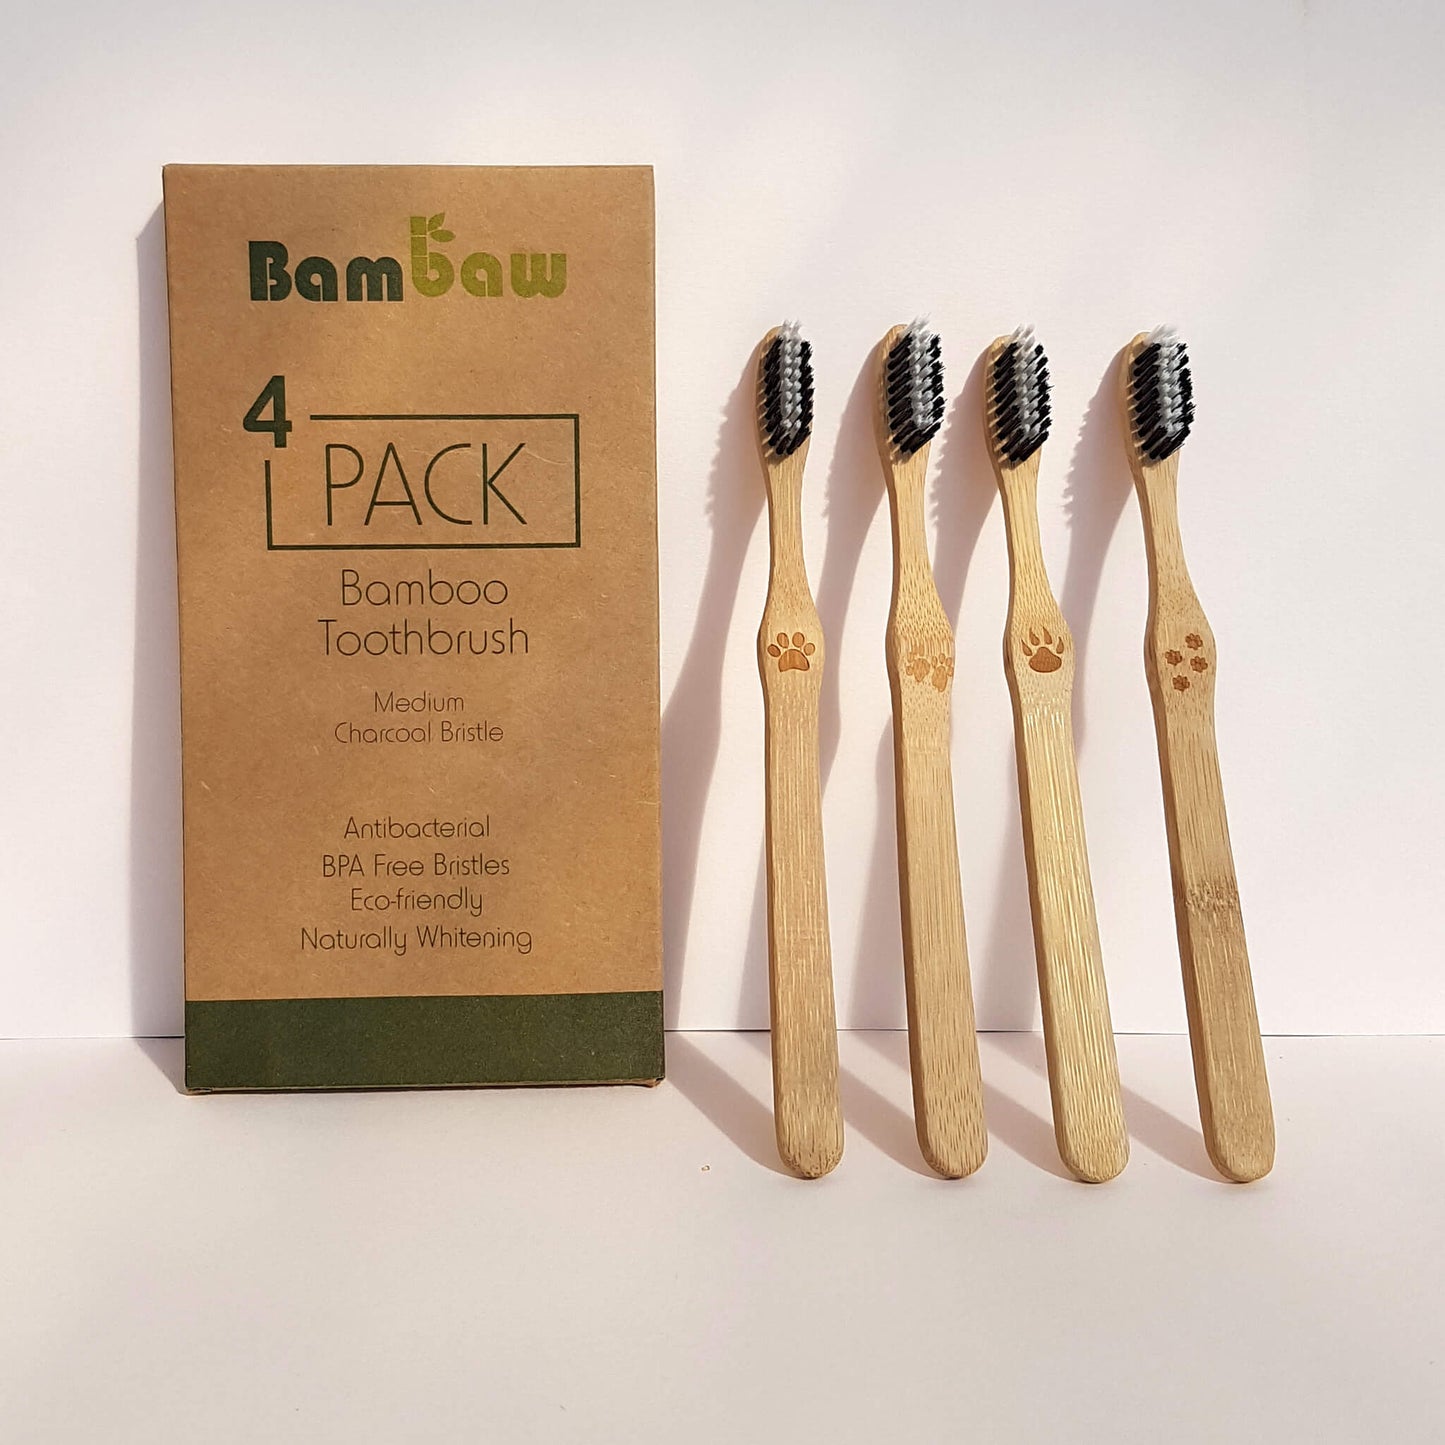 Organic Bamboo Toothbrushes - 4 pack - Unik by Nature